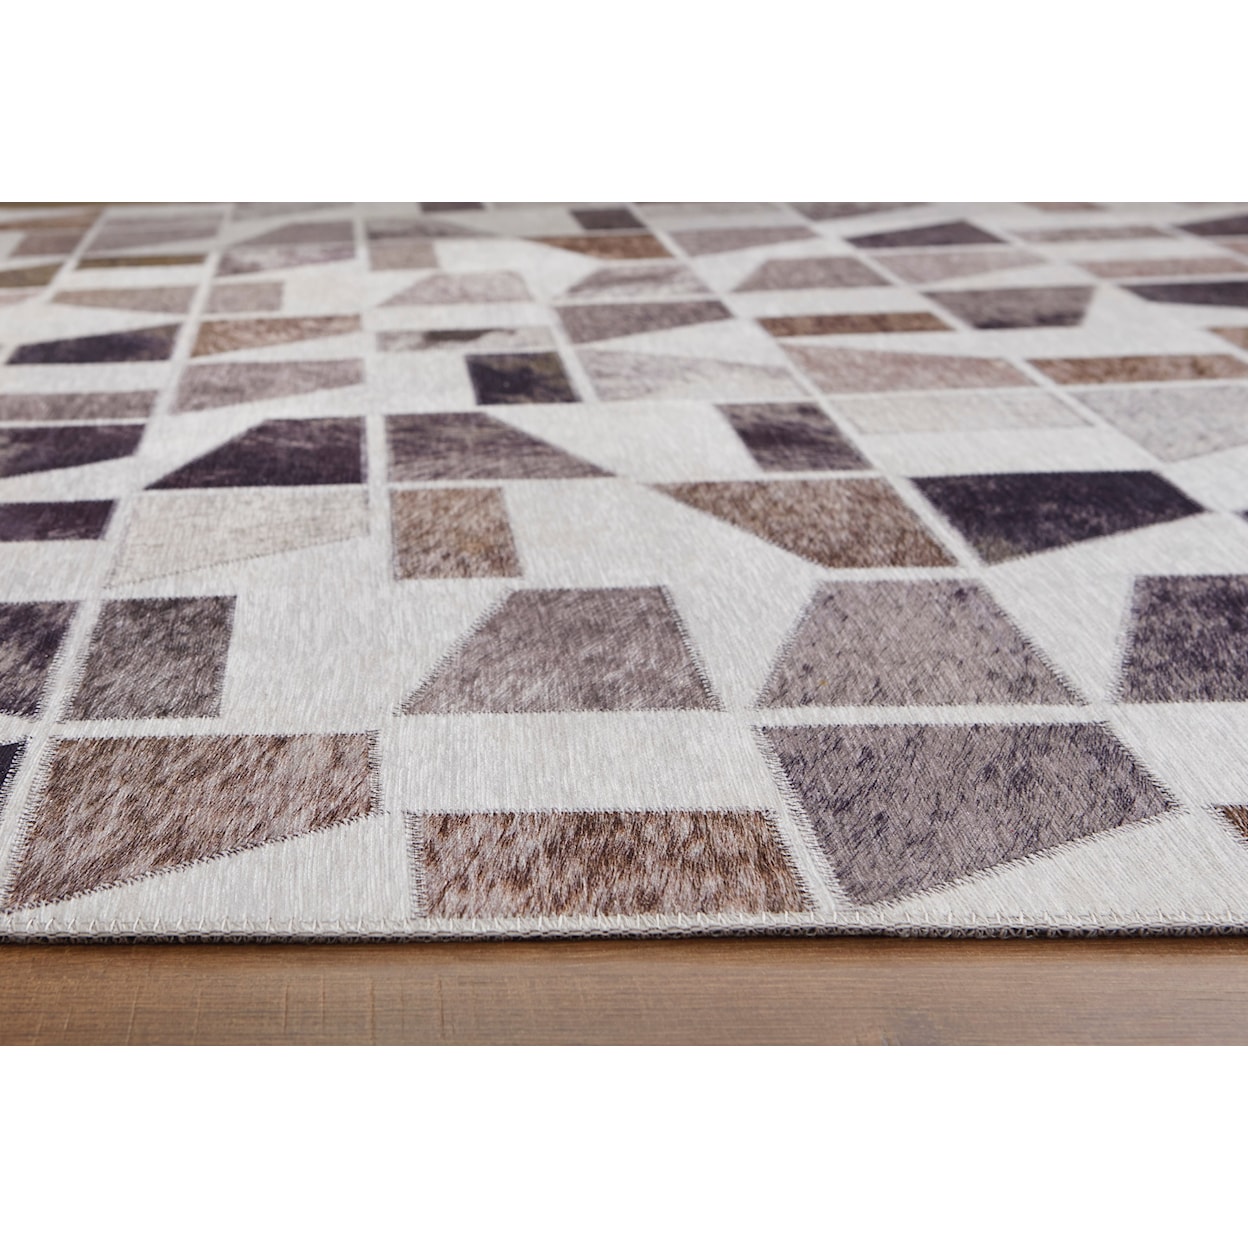 Benchcraft Contemporary Area Rugs Jettner 5' x 7' Rug